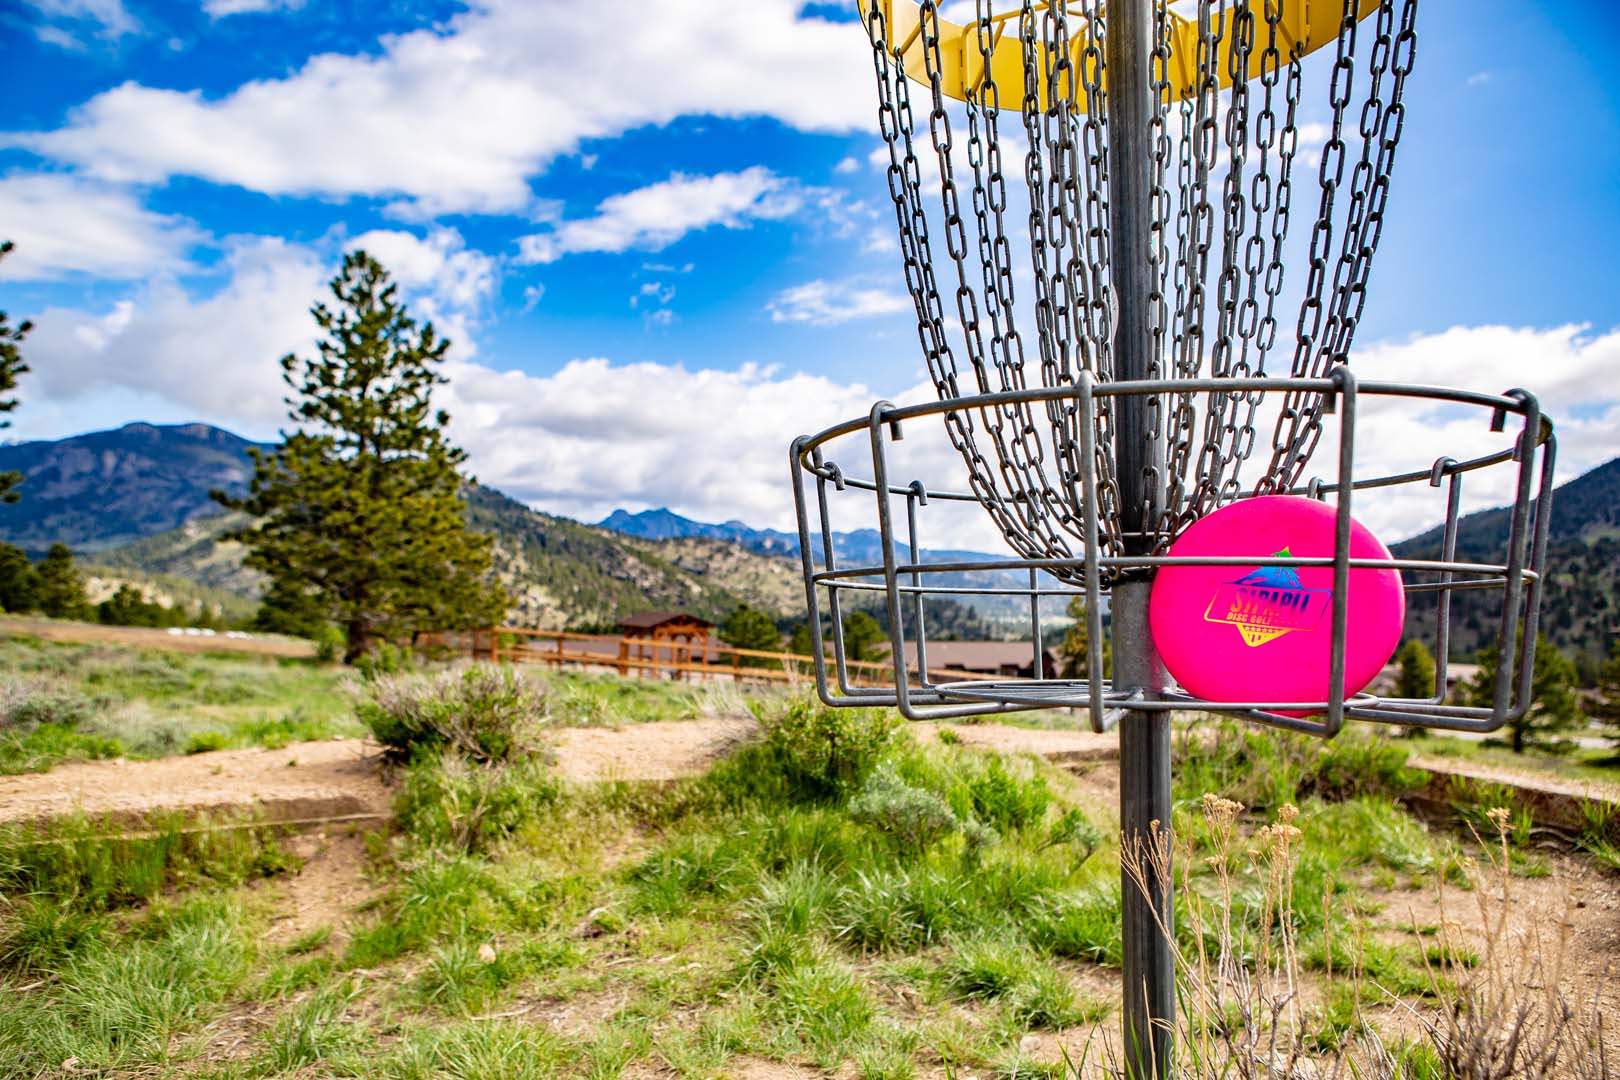 Disc golf with pink disc